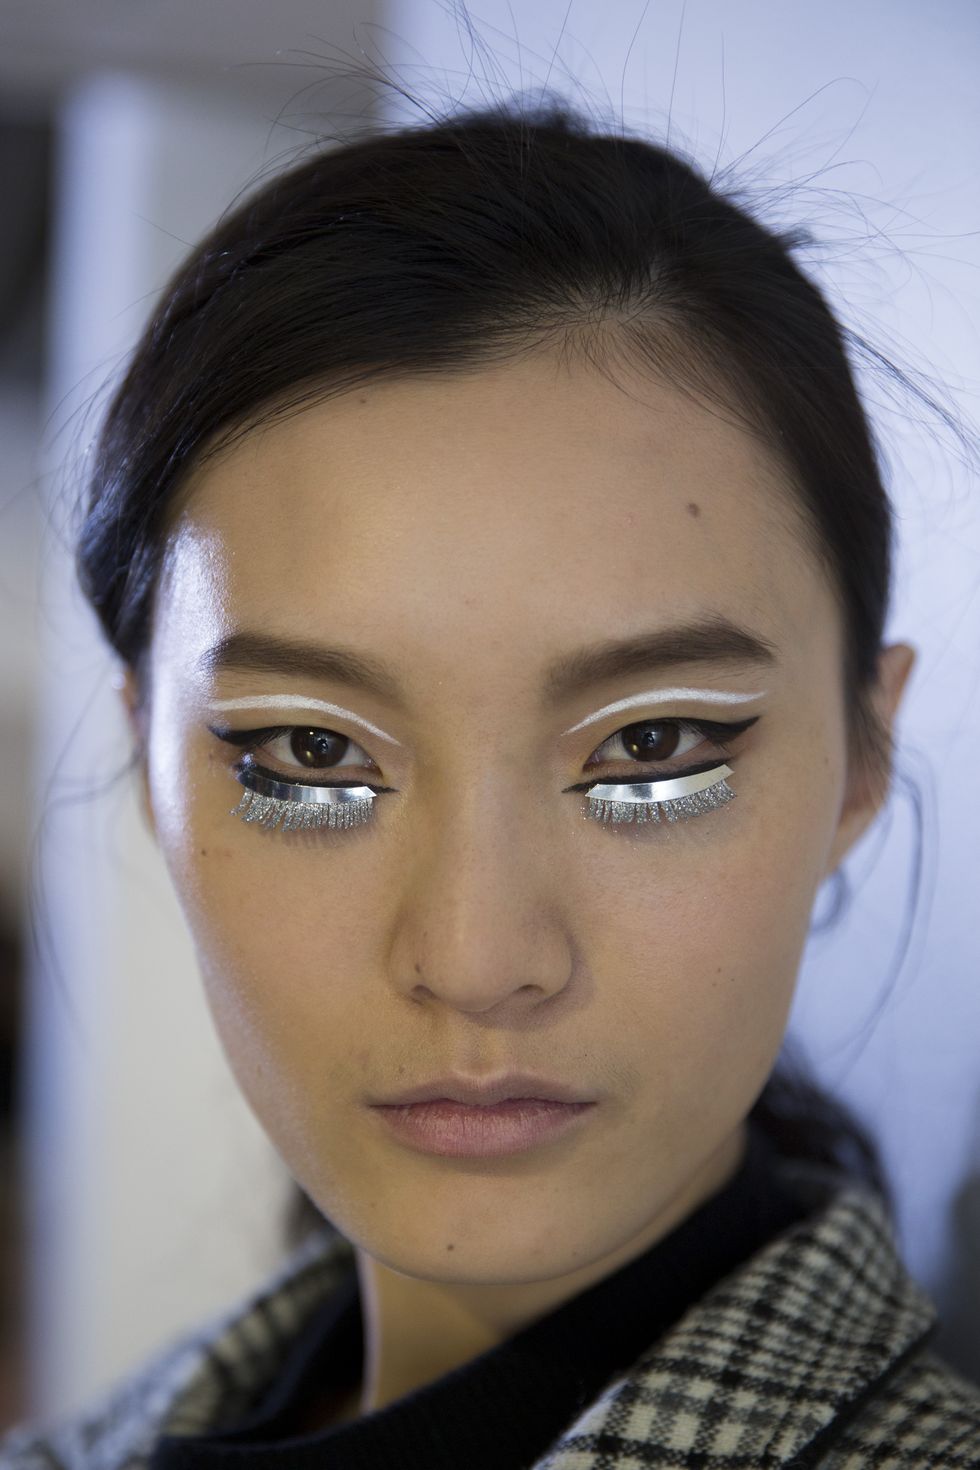 Autumn Makeup Trends For 2019 - Best AW19 Beauty Trends